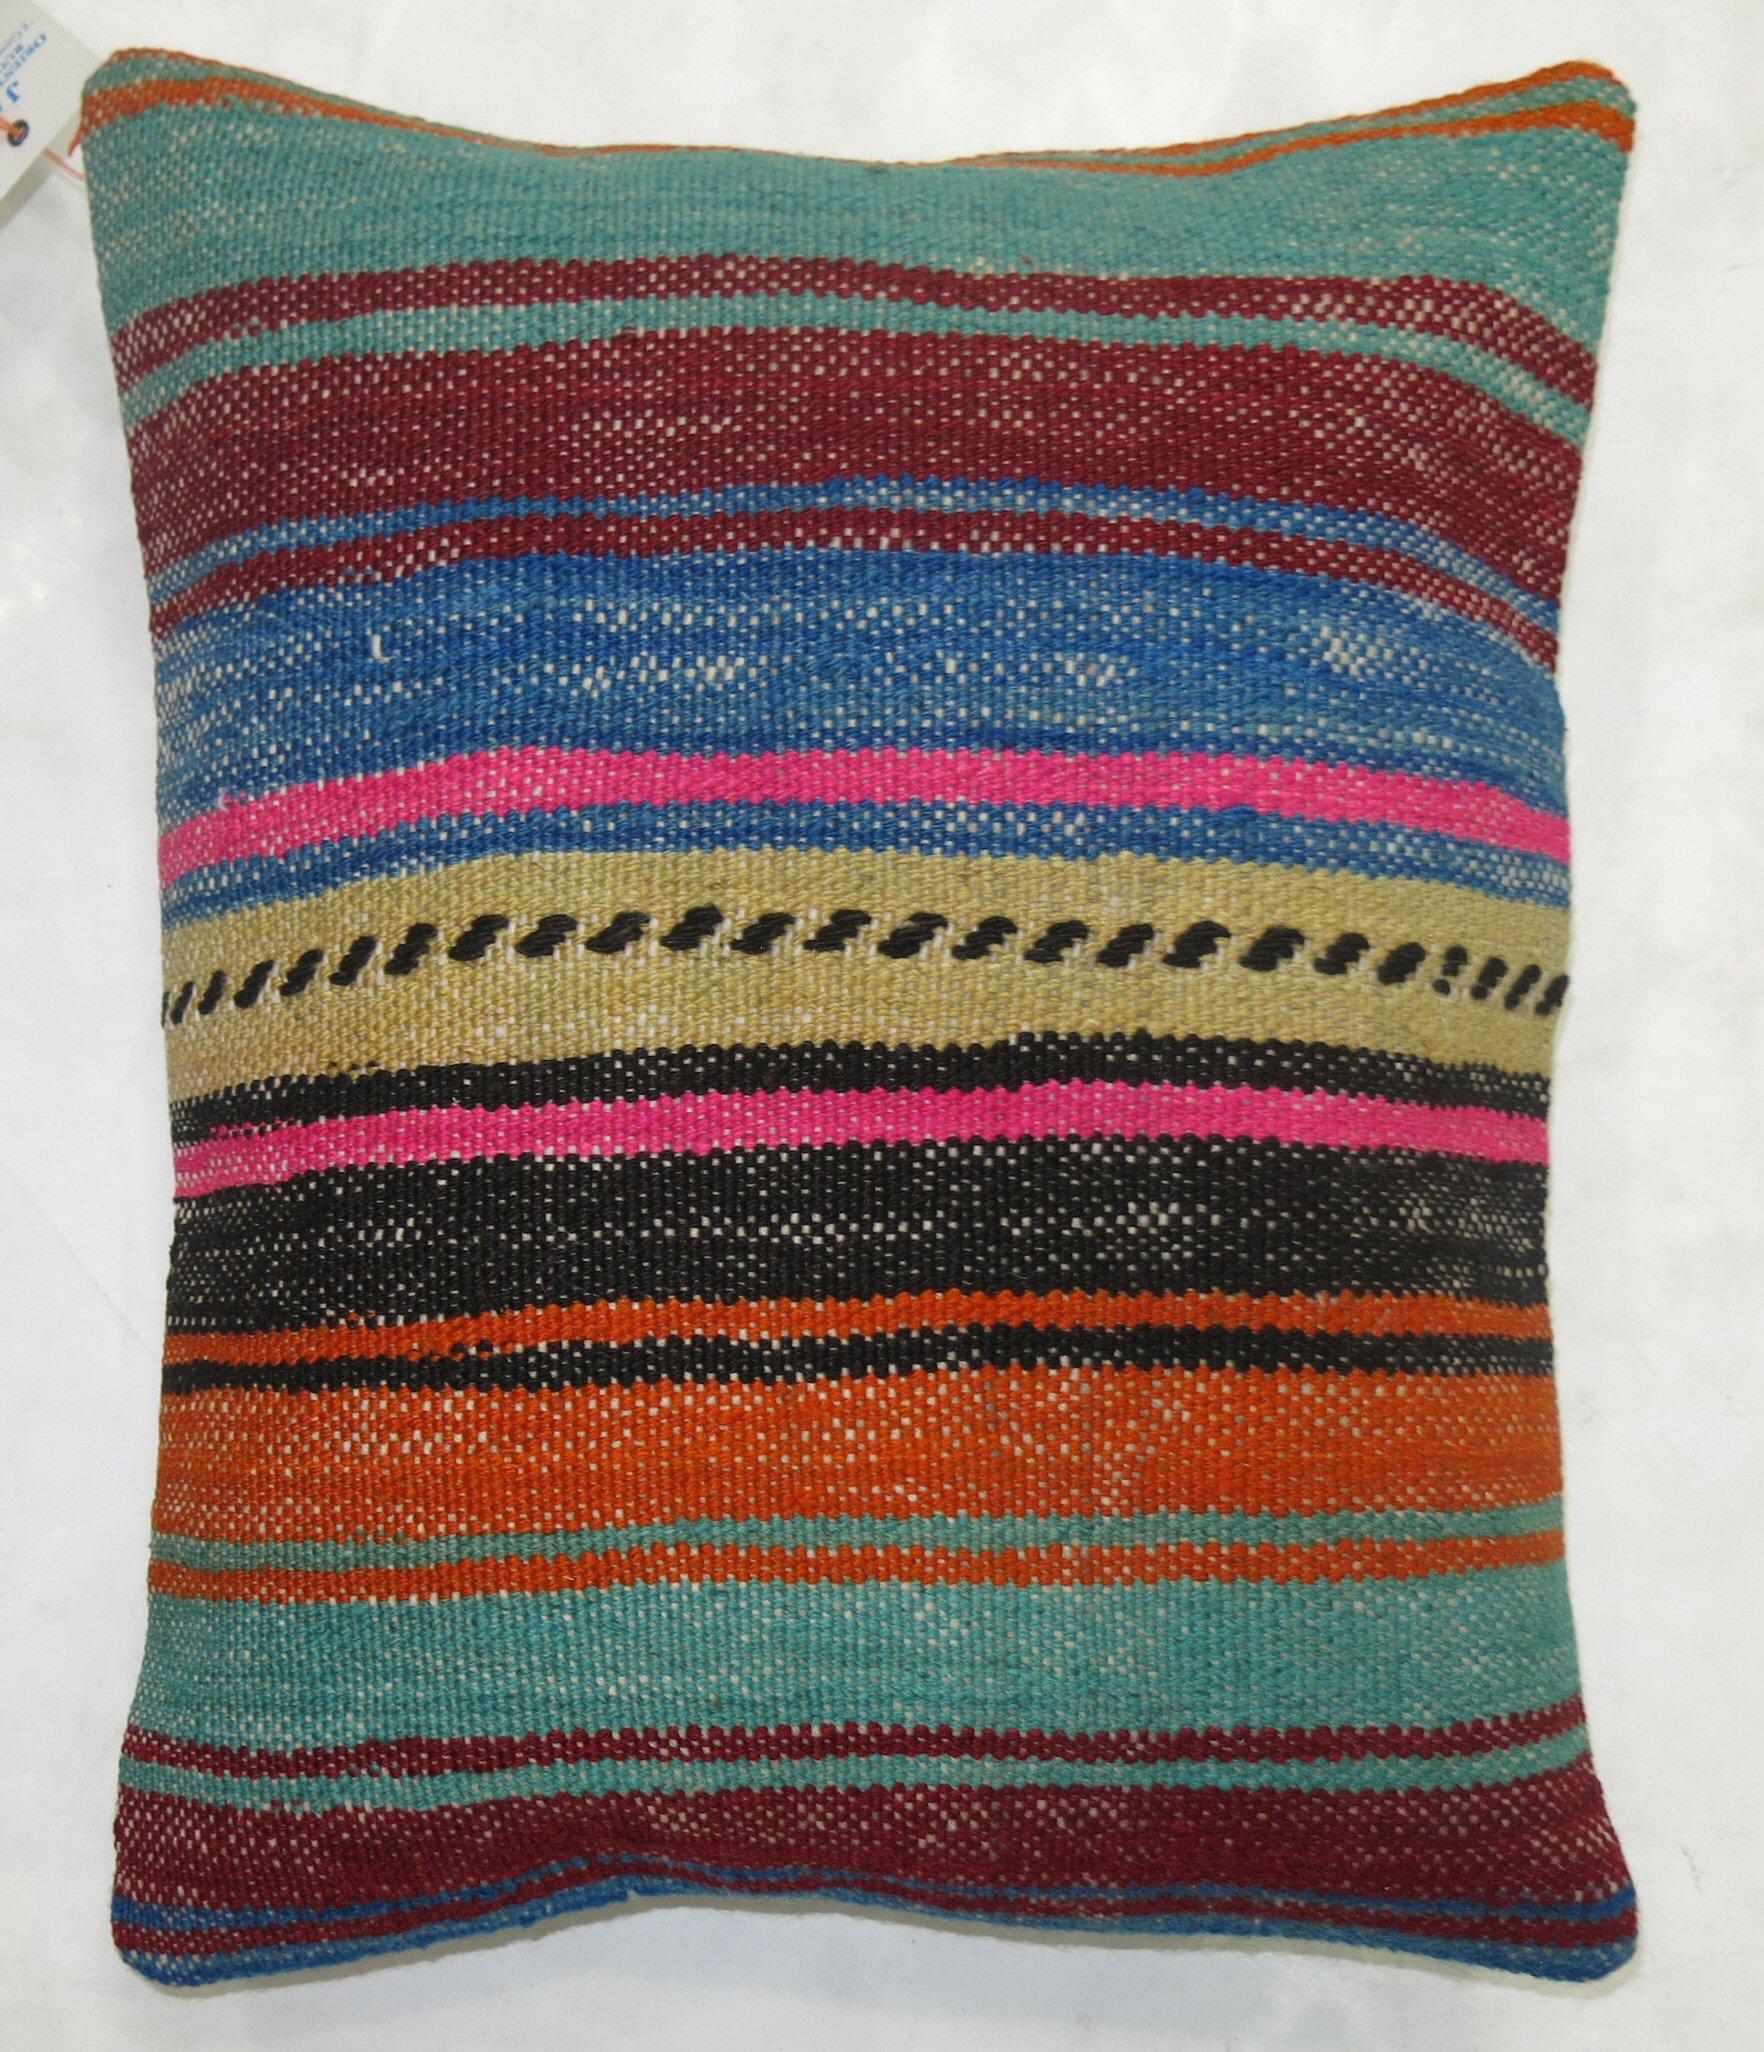 Pillow made from a vintage Turkish Kilim with a cotton back. Zipper closure and foam insert provided. 

Measures: 15'' x 18''.